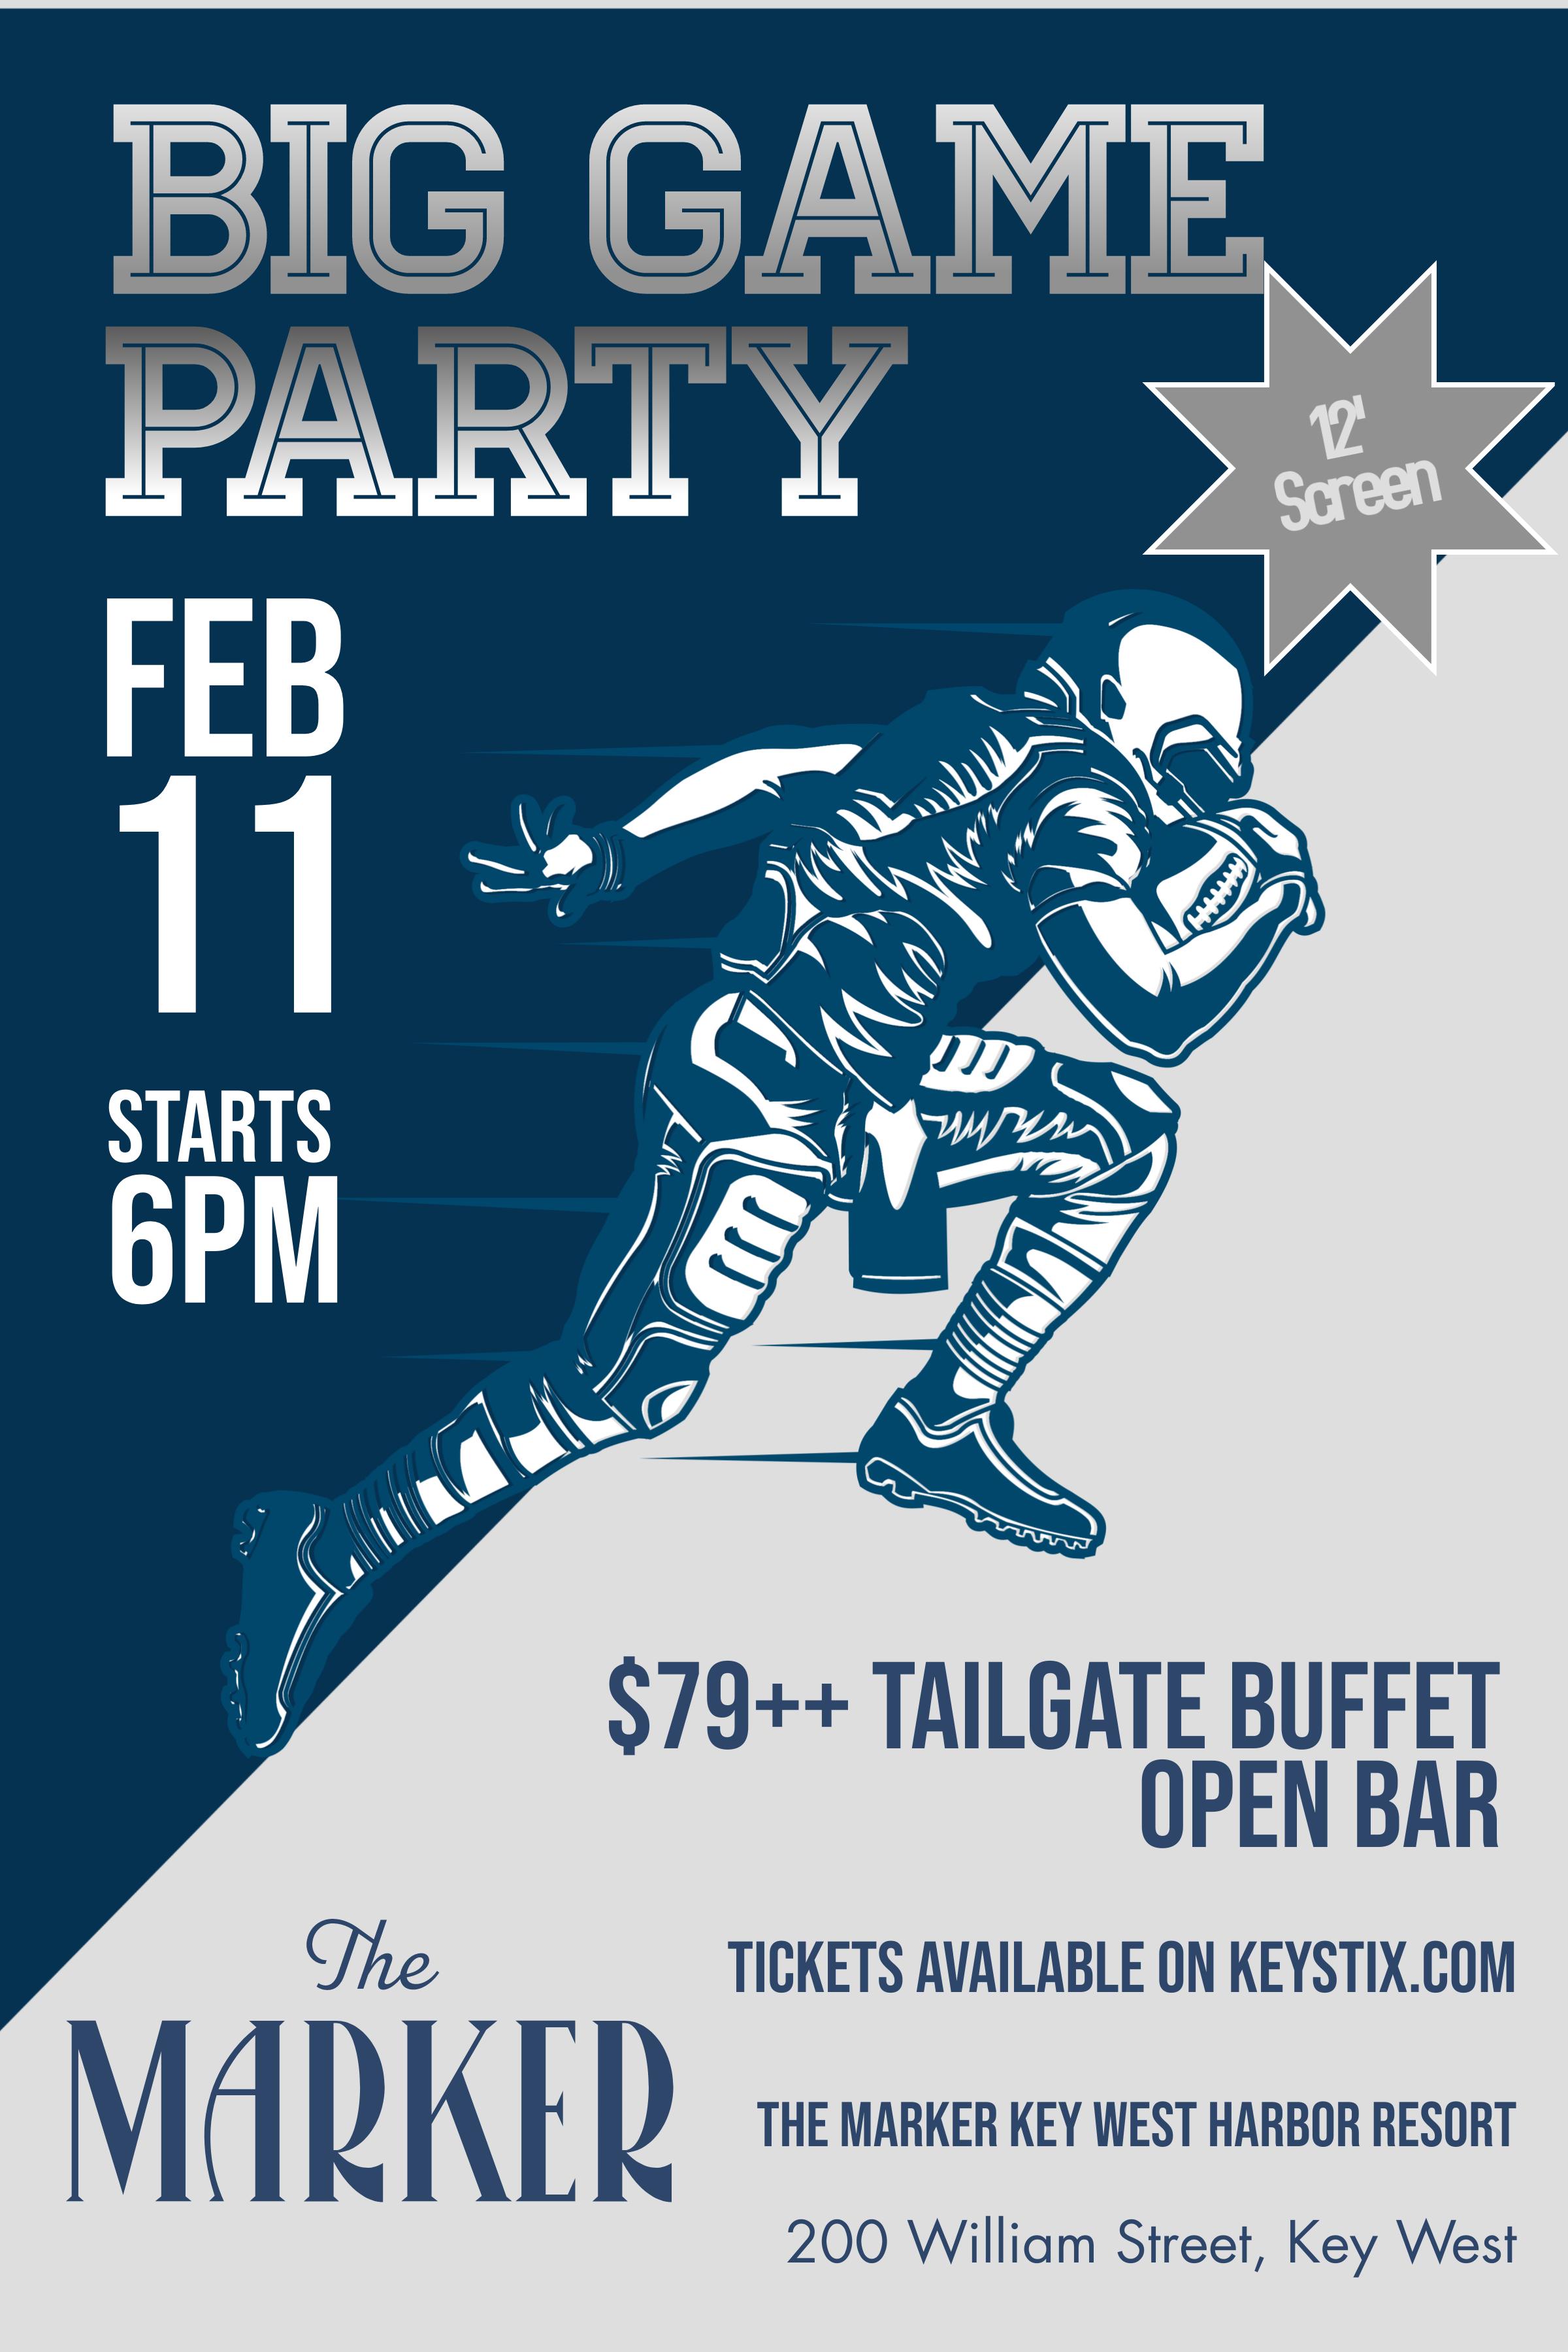 The "BIG GAME" Tailgate & Watch Party at The Marker Key West